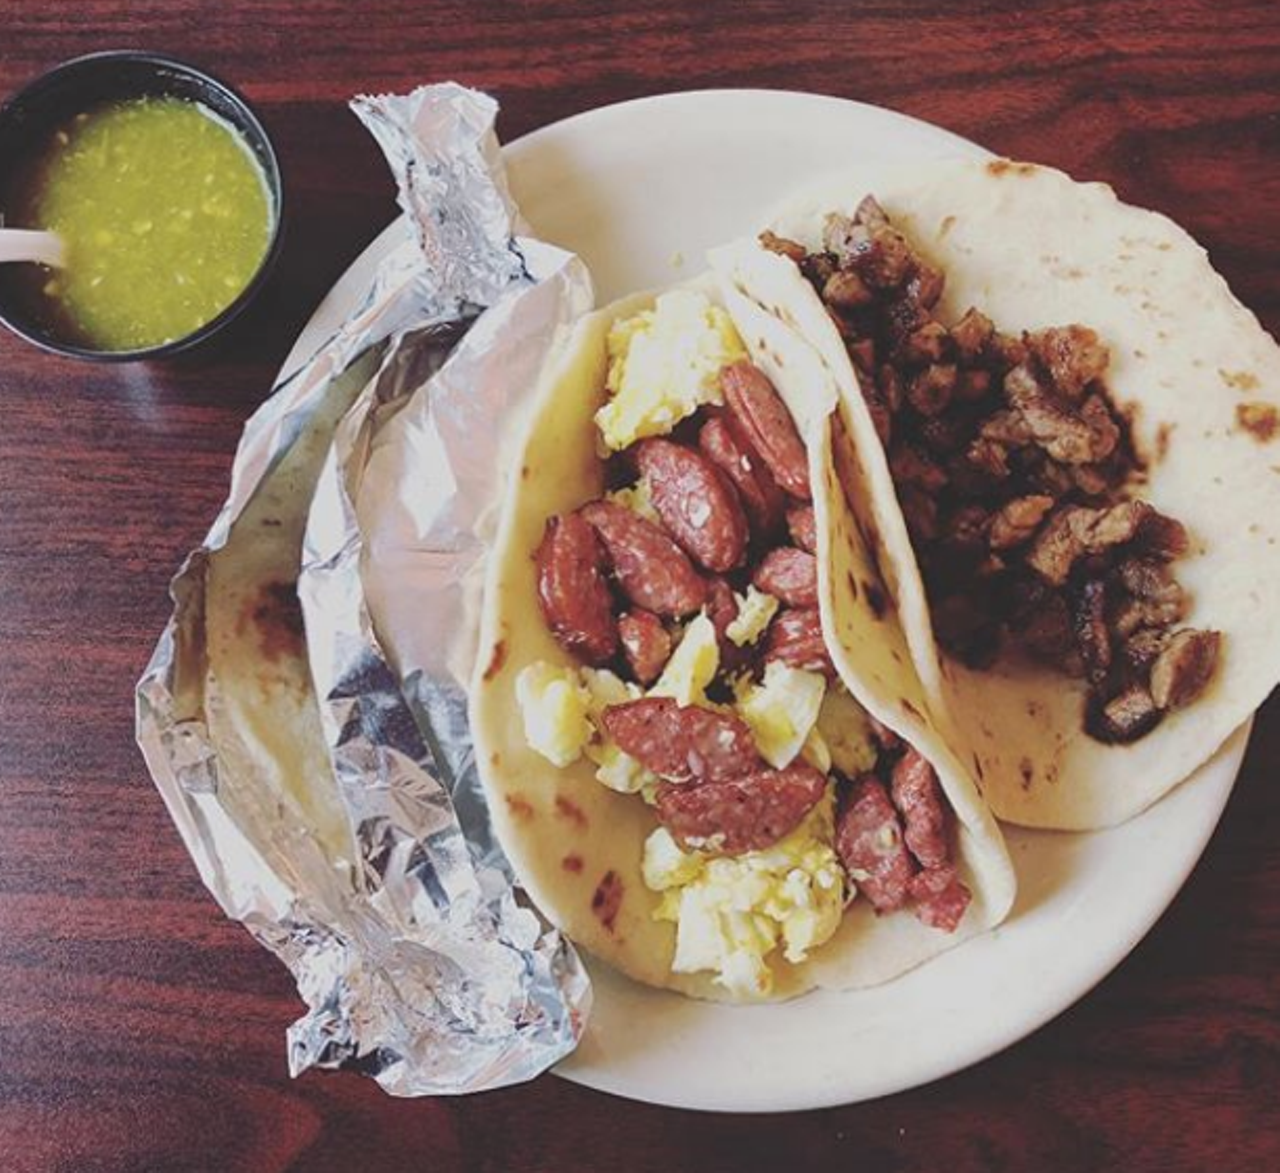 Breakfast tacos
While we won’t fight anyone to “claim” breakfast tacos anymore, it’s undeniable that breakfast tacos are crucial to San Antonio’s food landscape and culture in general. With so many taquerias/Mexican restaurants as well as fillings to try out (unless you’re dedicated to your favorites), eating a breakfast taco is never the same experience. So go ahead and eat all the breakfast tacos you desire, in the name of San Antonio.
Photo via Instagram / eatmigos